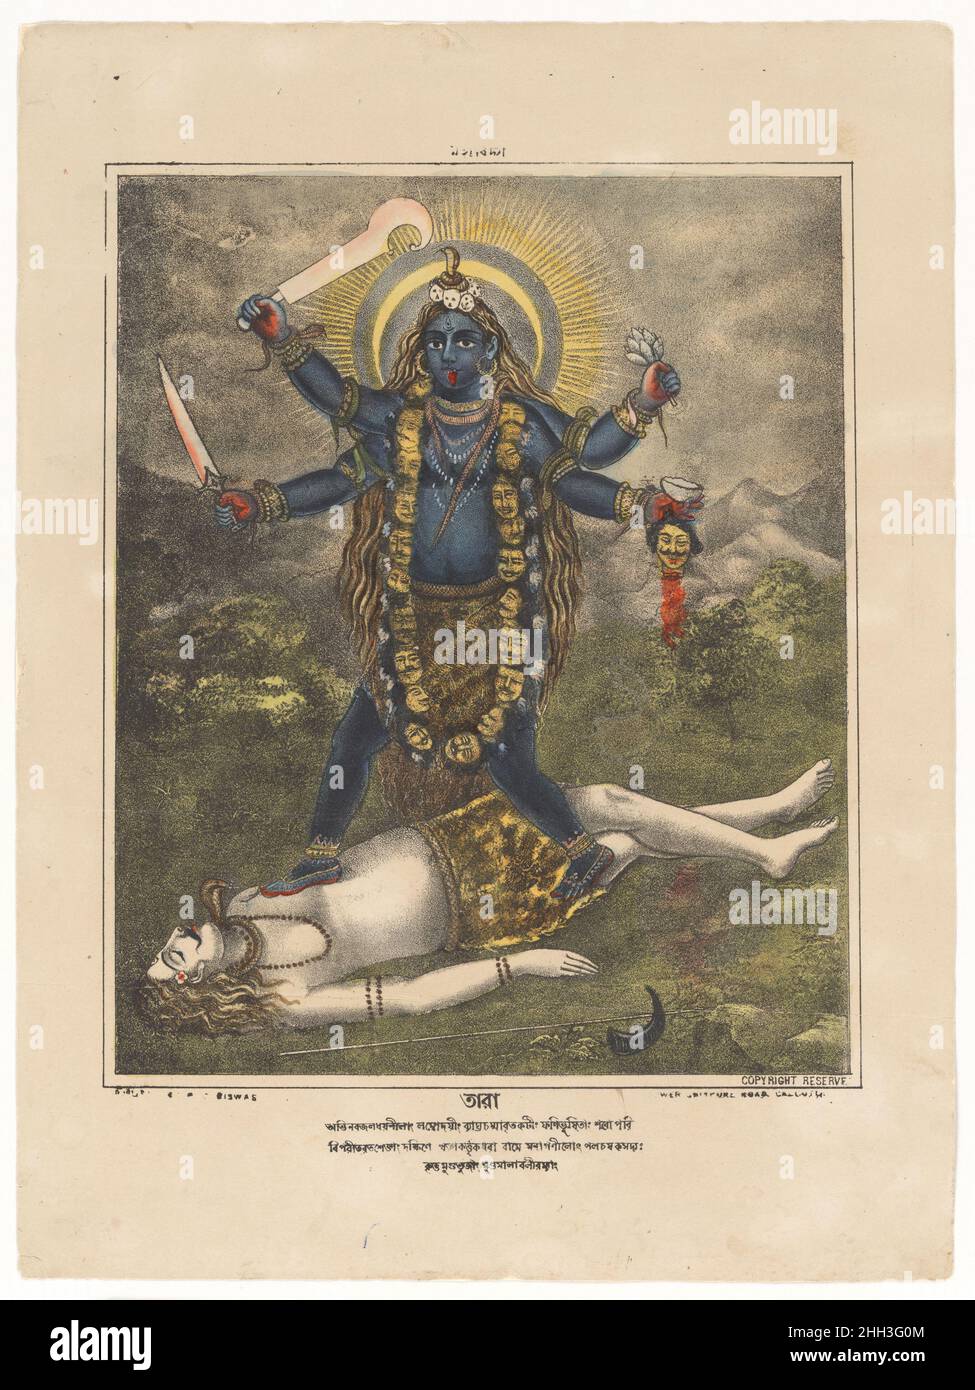 Goddess Tara ca. 1880–85 West Bengal, Calcutta This remarkable image has all the trappings of the goddess Kali but is named as the mahavidya Tara, a personification of the transcendent wisdom who guides devotees to salvation (moksha), protecting them on their journey. She is also worshipped as the source of divine energy including the power of the sun. Iconographically she is distinguished from Kali was her dark blue complexion and a swelling stomach indicating her pregnant state. In other respects, they share much, both being four-armed and wielding two butchering blades, wearing a garland of Stock Photo